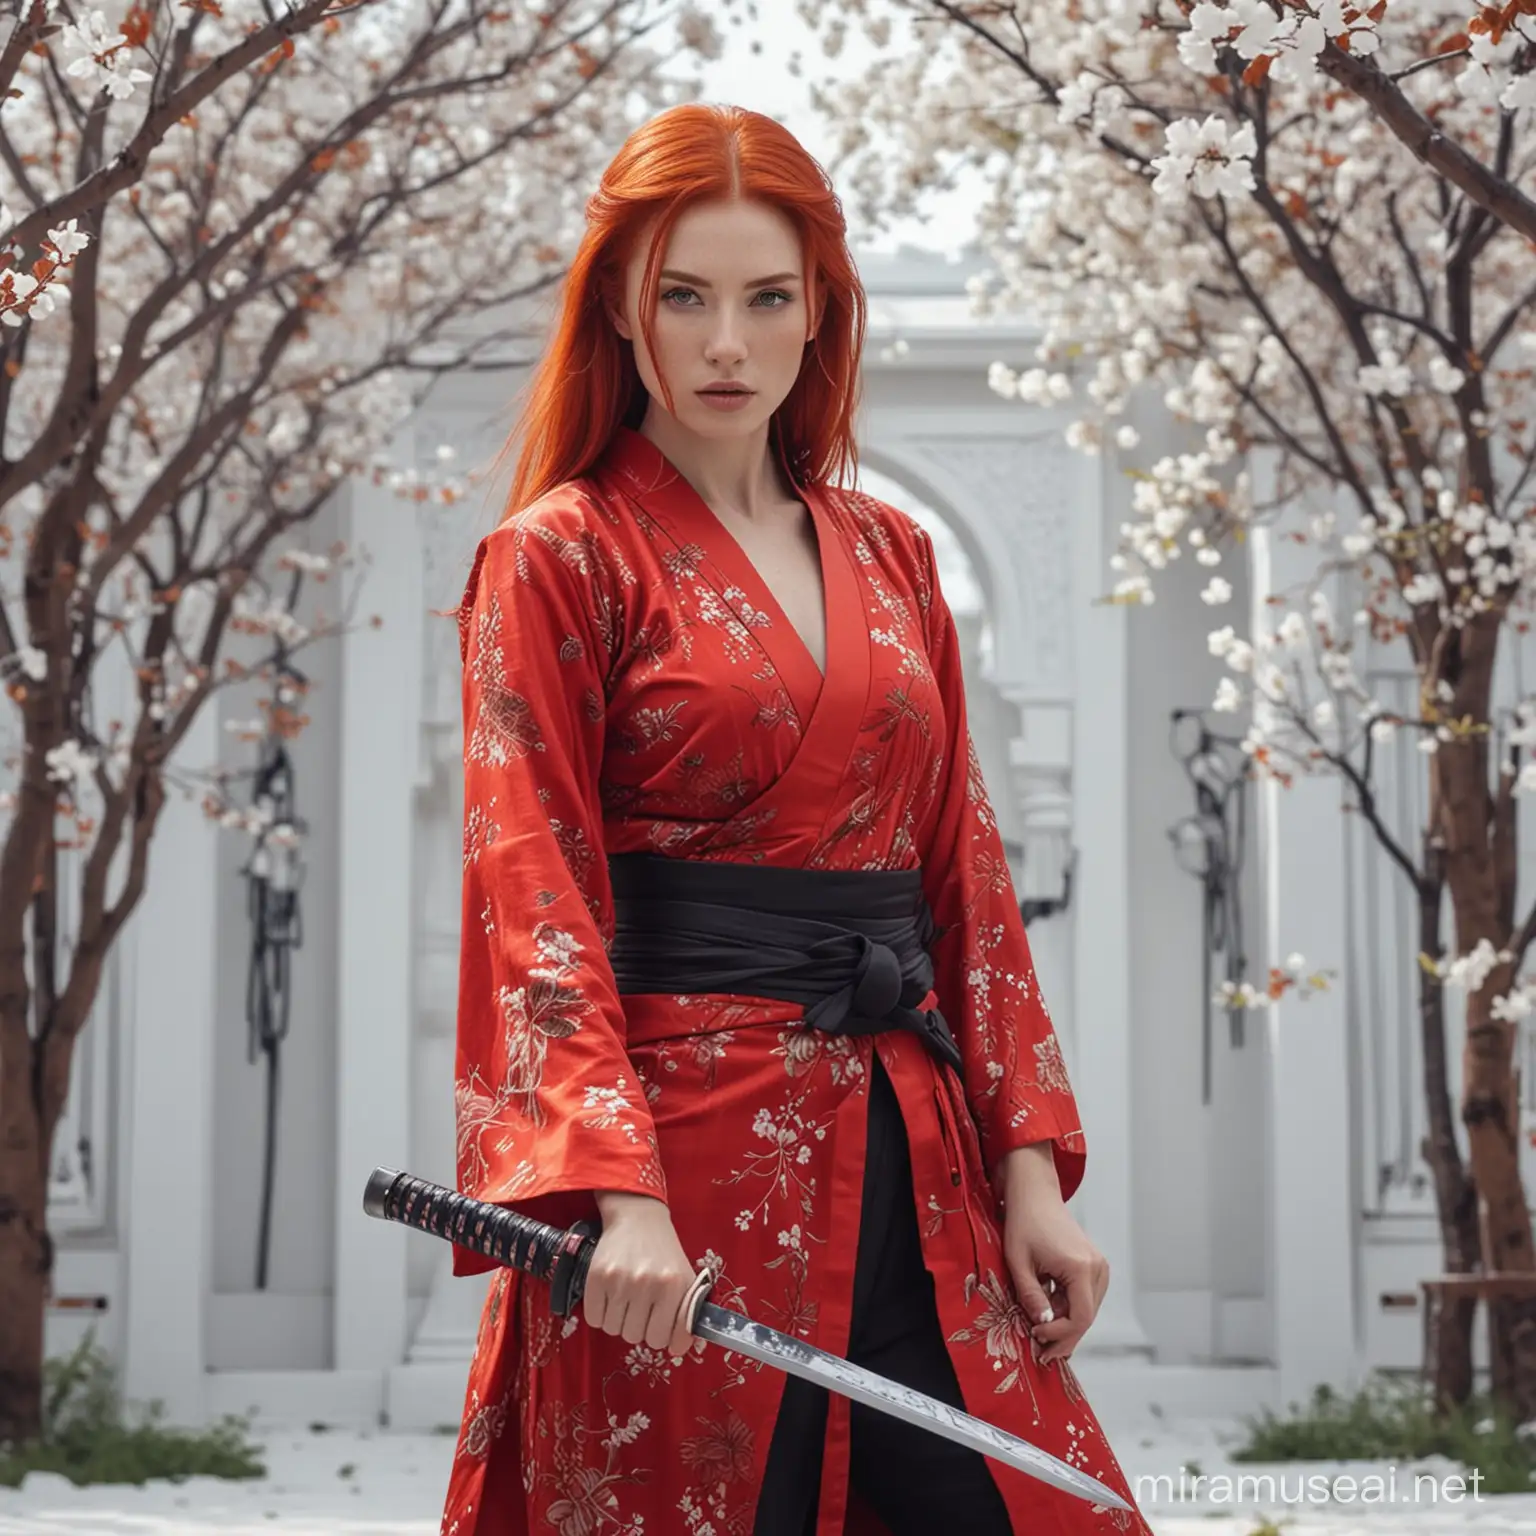 RedHaired Warrior Woman with Katana in Enchanting White Neon Garden